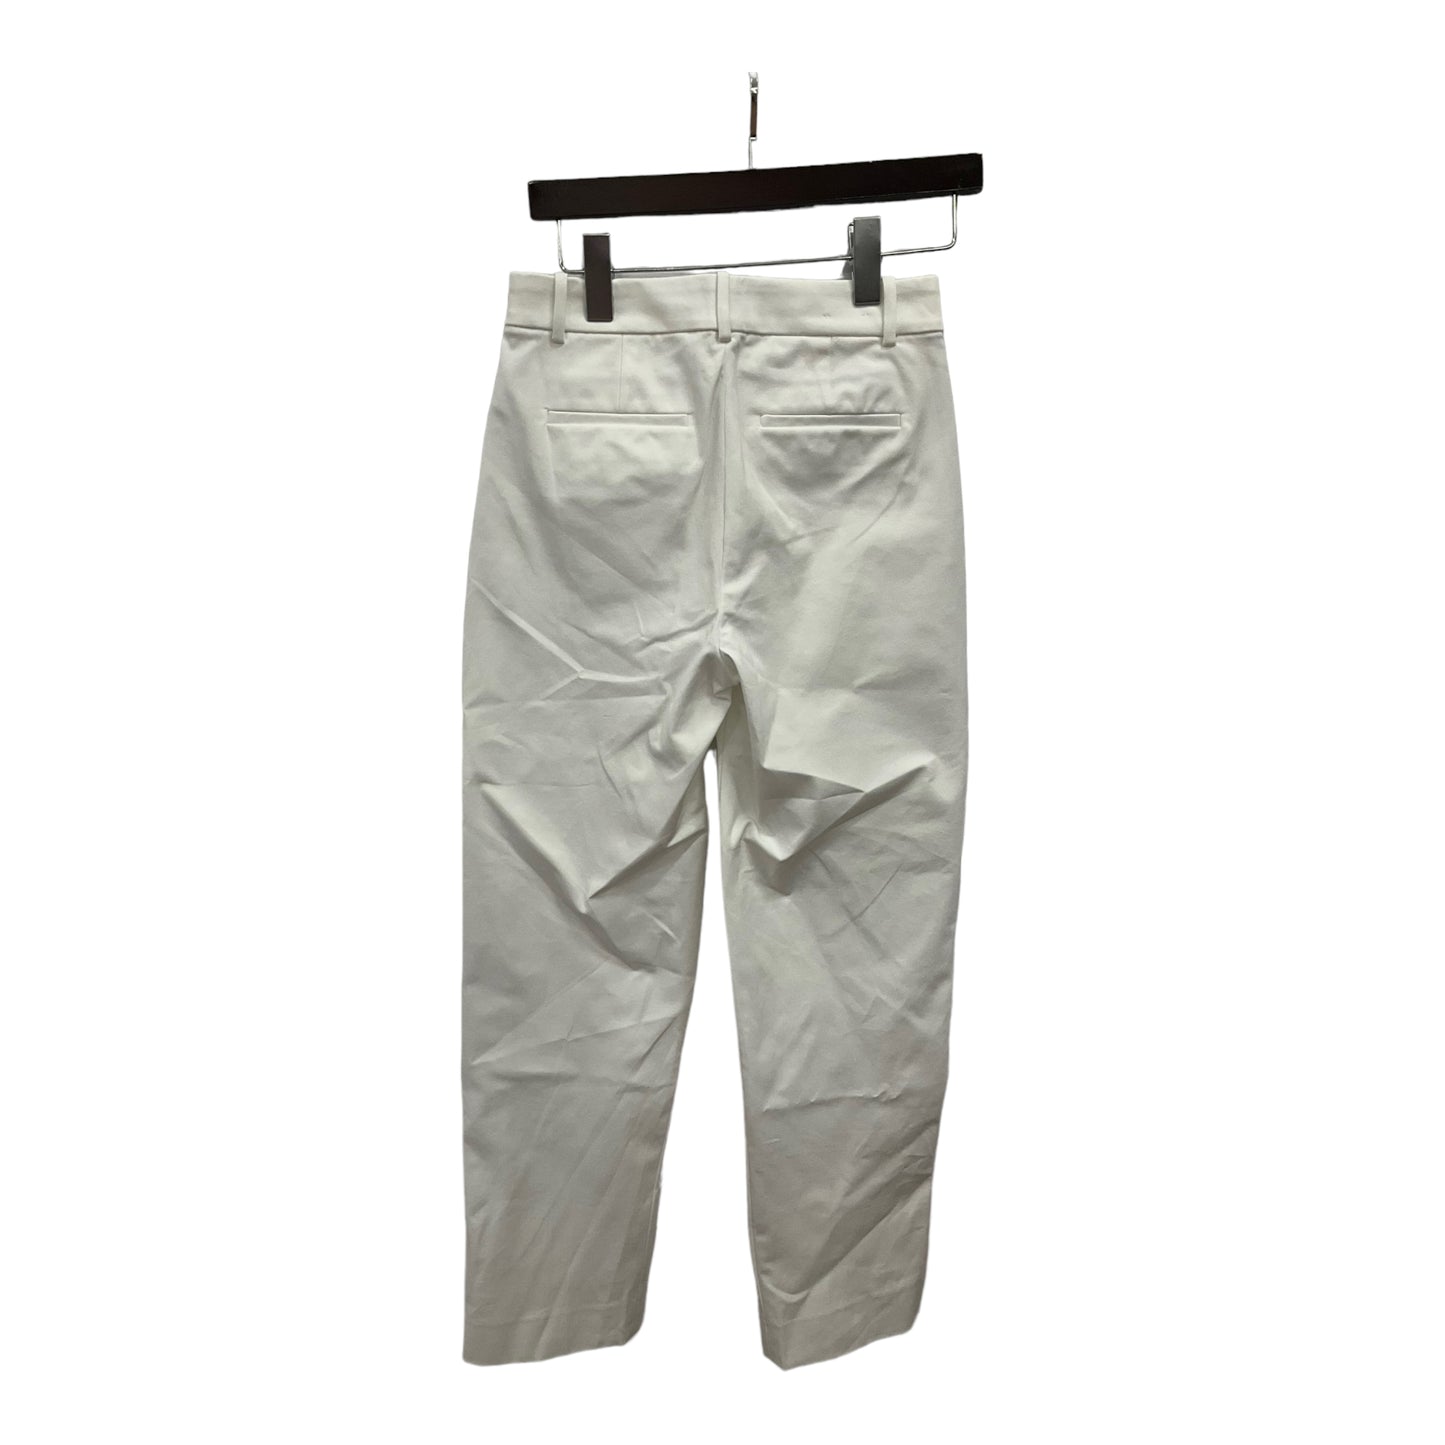 Pants Ankle By J Crew  Size: 0